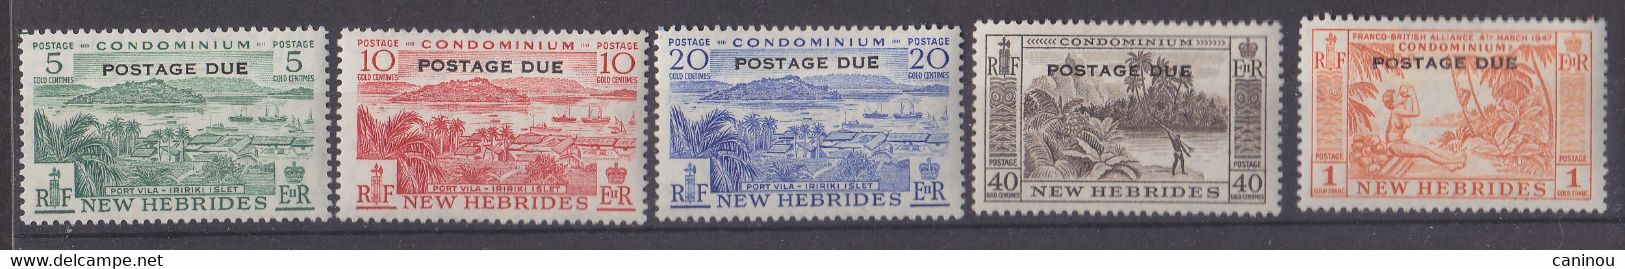 NOUVELLES-HEBRIDES Y & T TAXE 41-45 PAYSAGE LEGENDE ANGLAISE NEW HEBRIDES POSTAGE DUE 1957 NEUFS AVEC CHARNIERES - Timbres-taxe